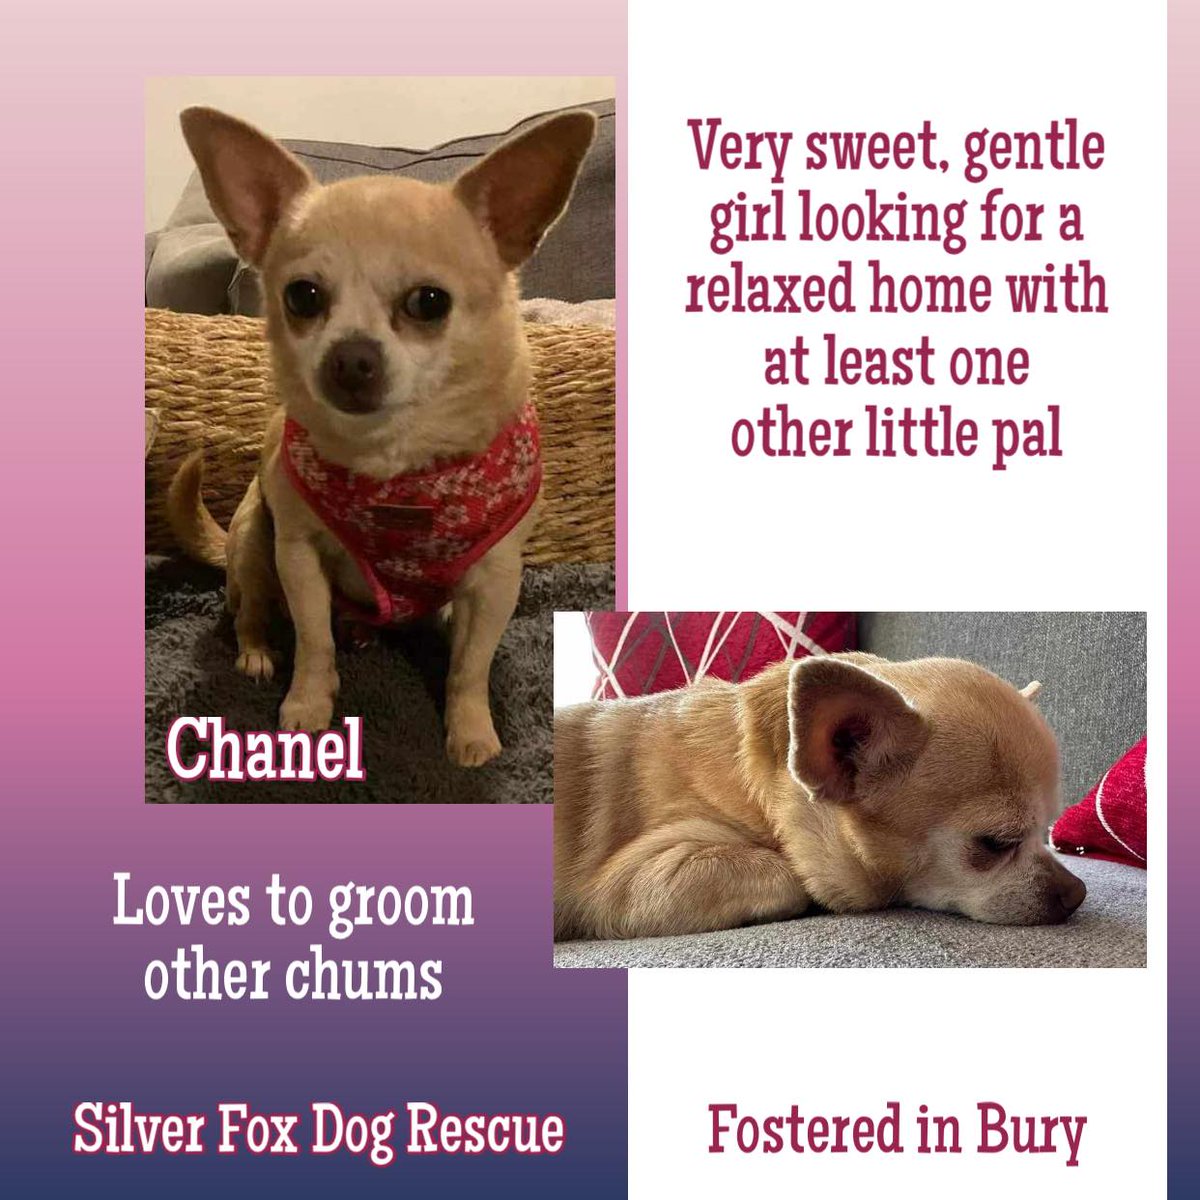 9yo CHANEL is a very sweet, gentle girl who is looking for a relaxed home with at least one other calm, small, older dog. When she settles she loves grooming other dogs. Chanel is not cat tested & can live with older, sensible children only. Chanel is currently in foster in #Bury…